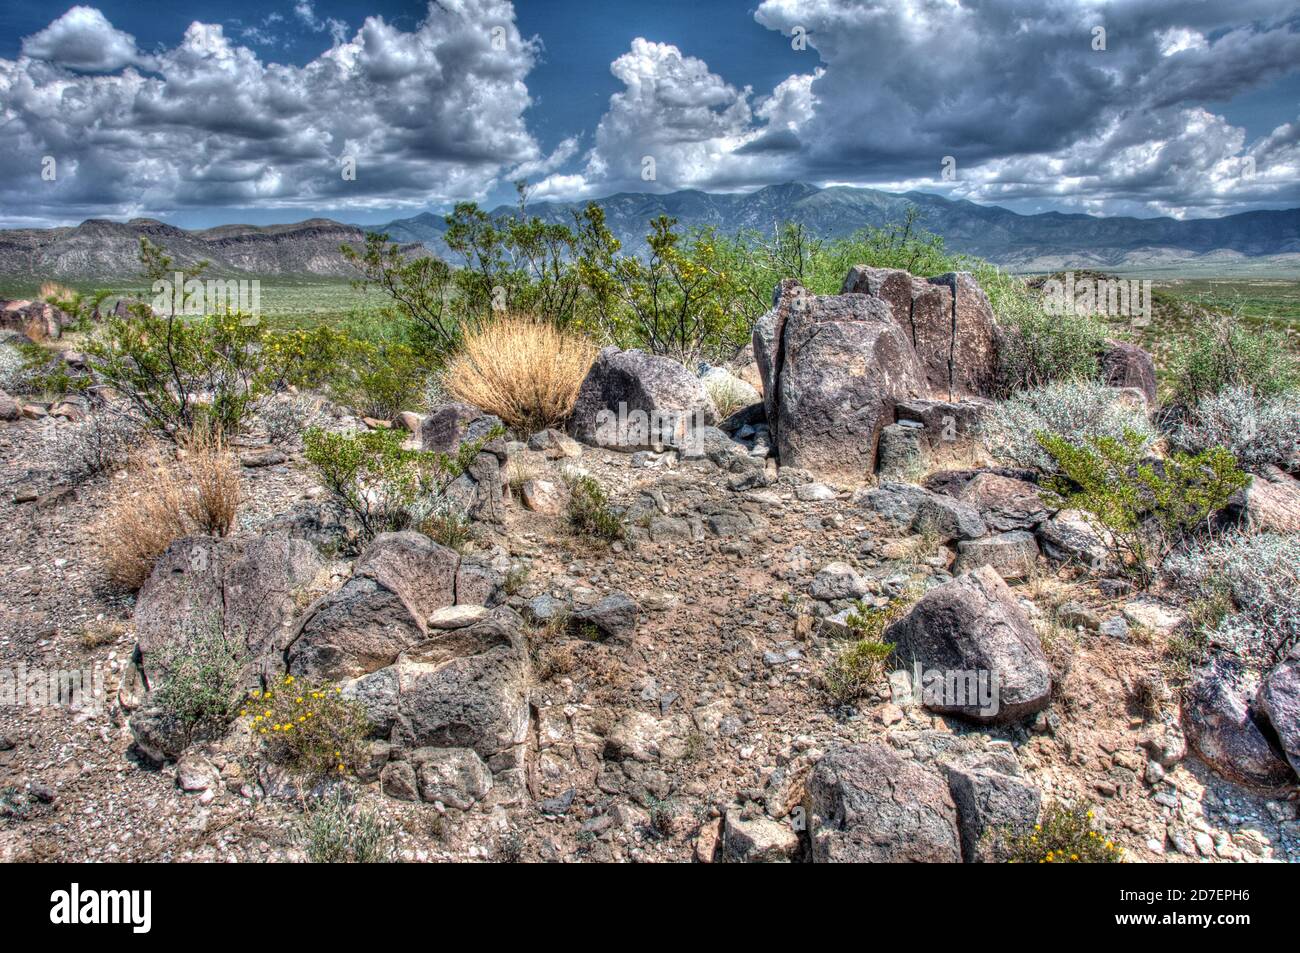 Three Rivers Petroglyph Site near Tularosa, New Mexico, with the Sierra Blanca Mountains in the distance. Stock Photo